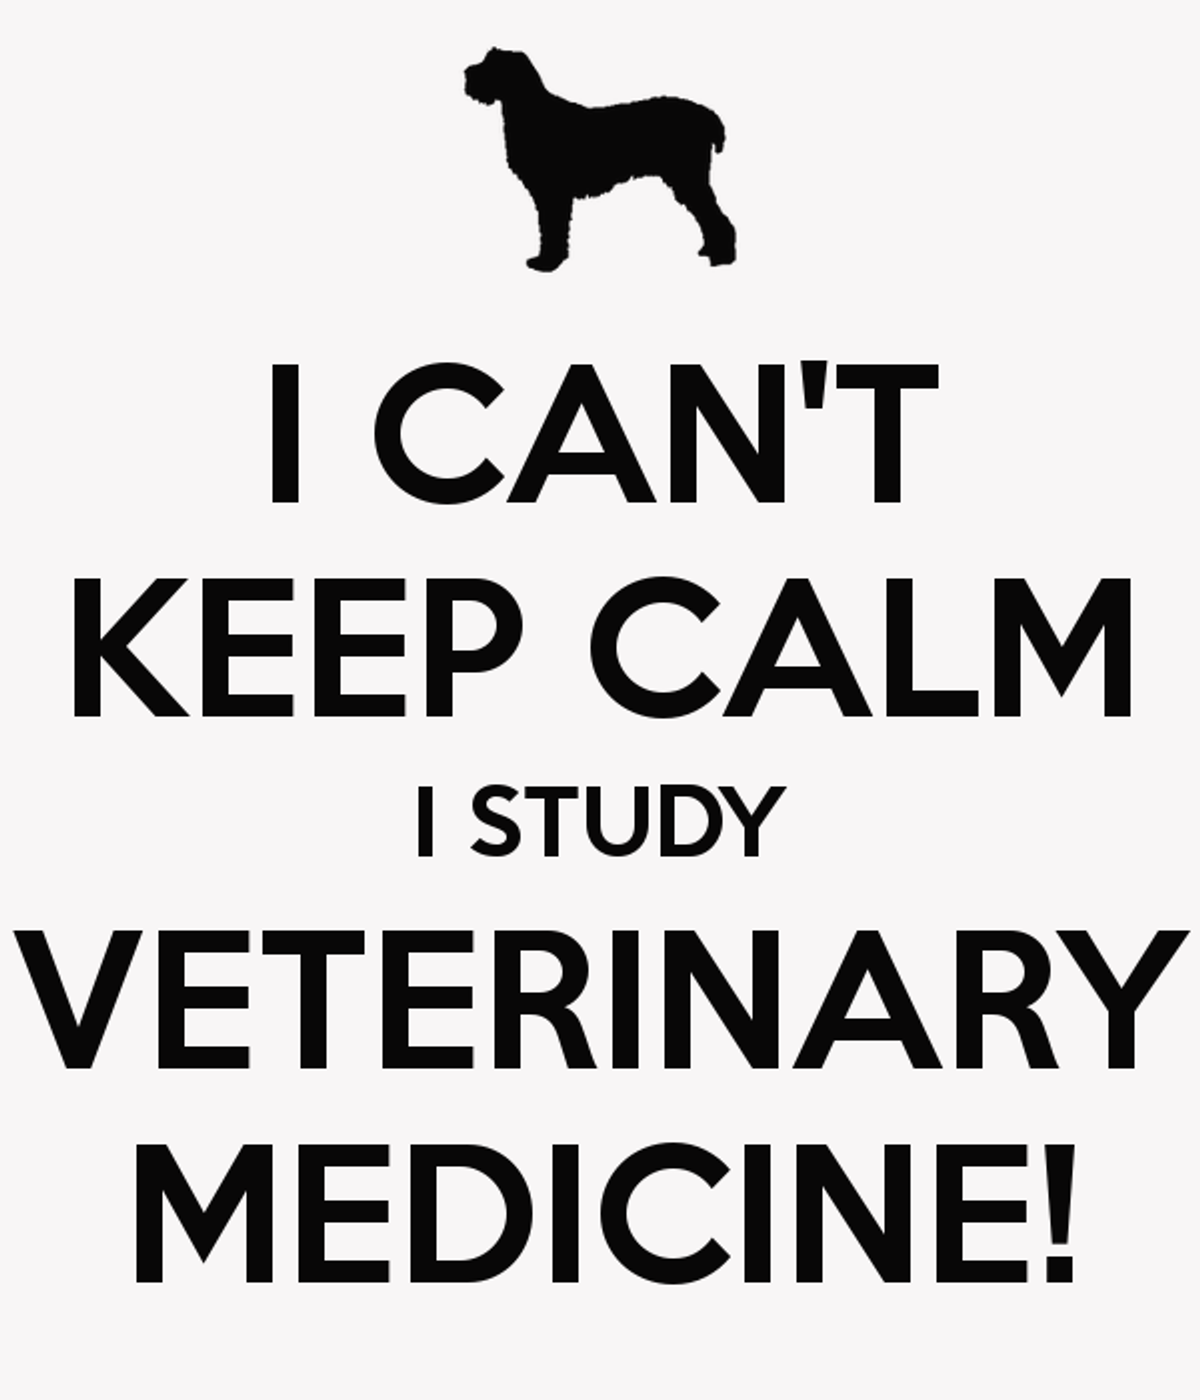 Vet School.. that's all I can say